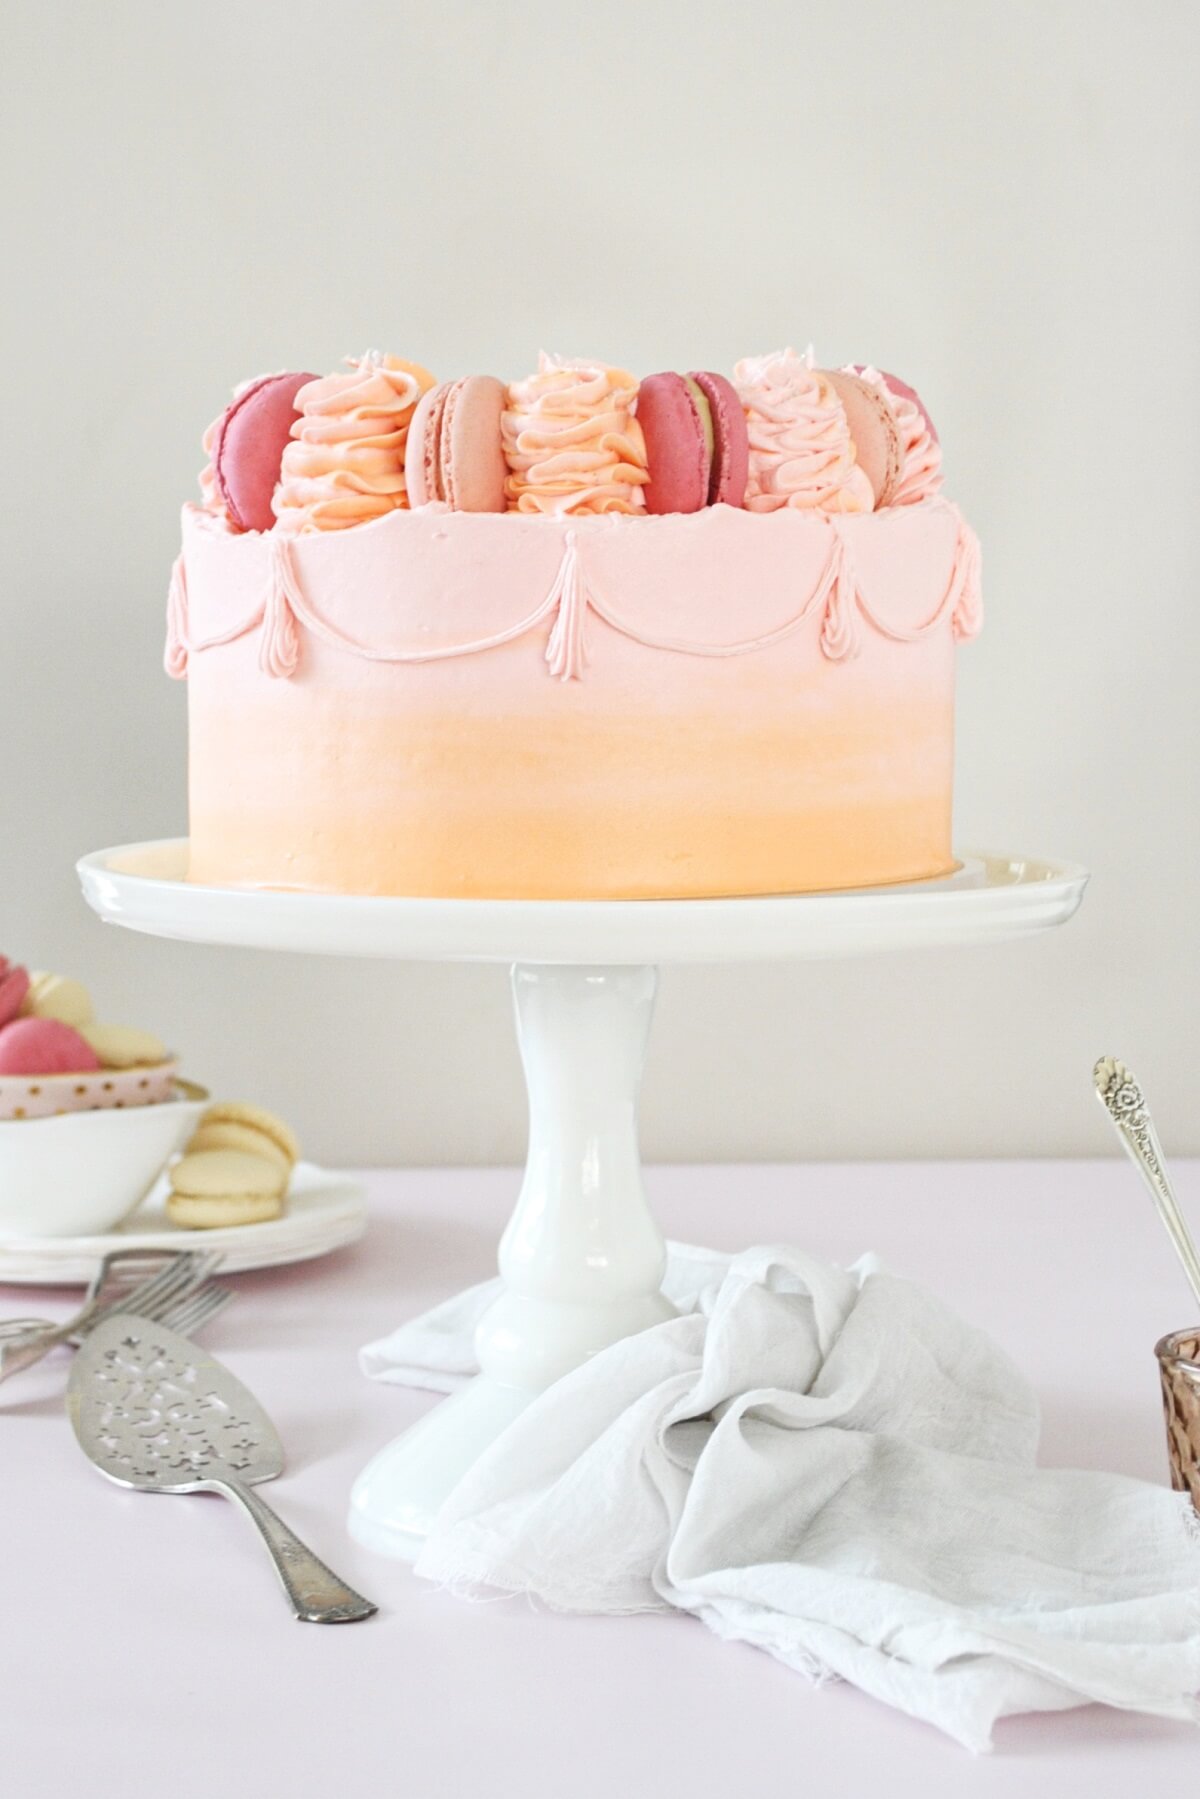 A cake on a white cake stand, frosted with pink and orange watercolor buttercream, topped with macarons and swirls of buttercream.